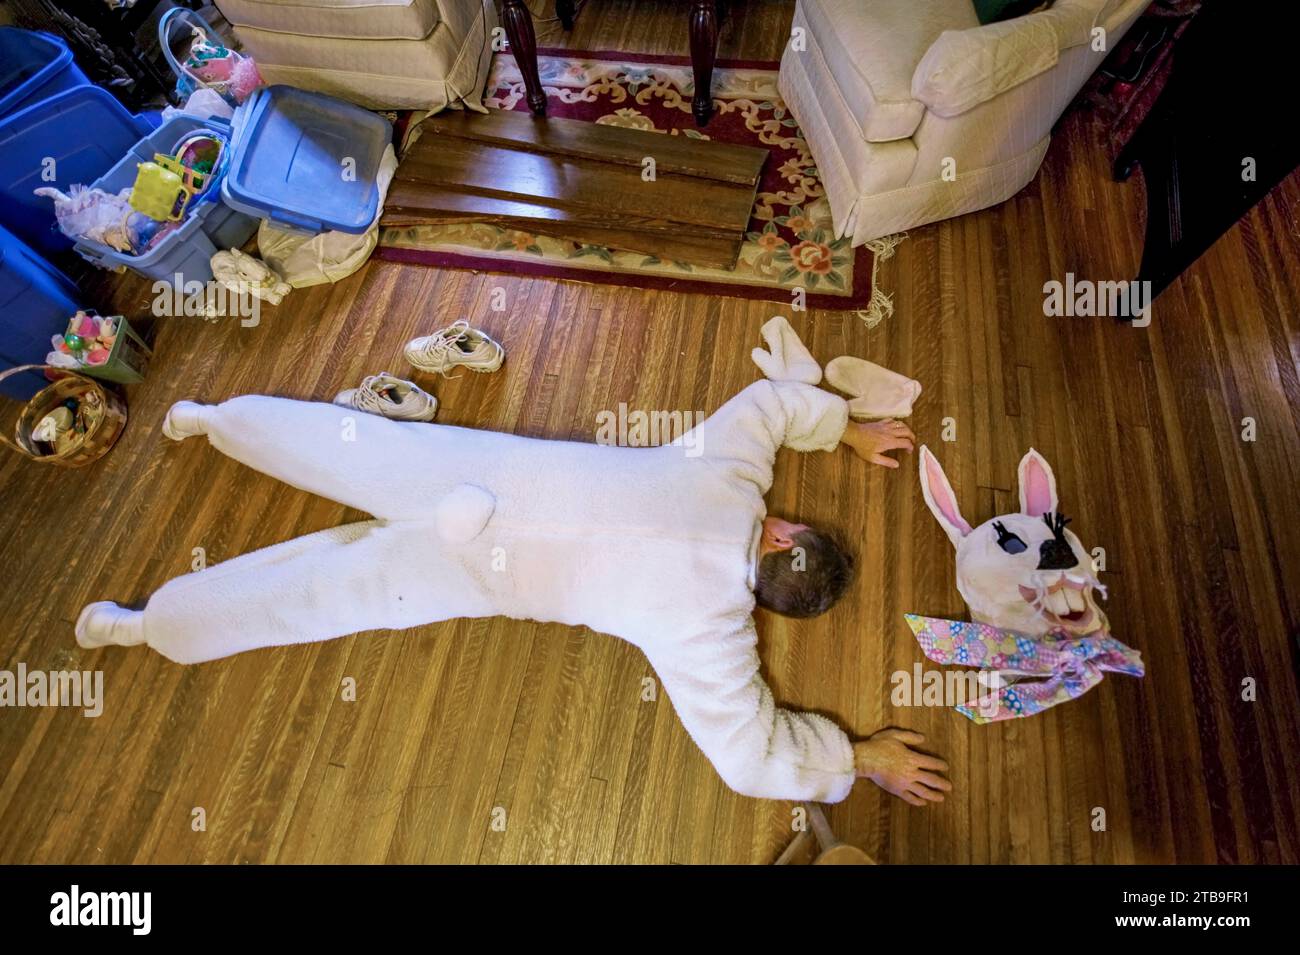 Exhausted Easter Bunny; Lincoln, Nebraska, United States of America Stock Photo